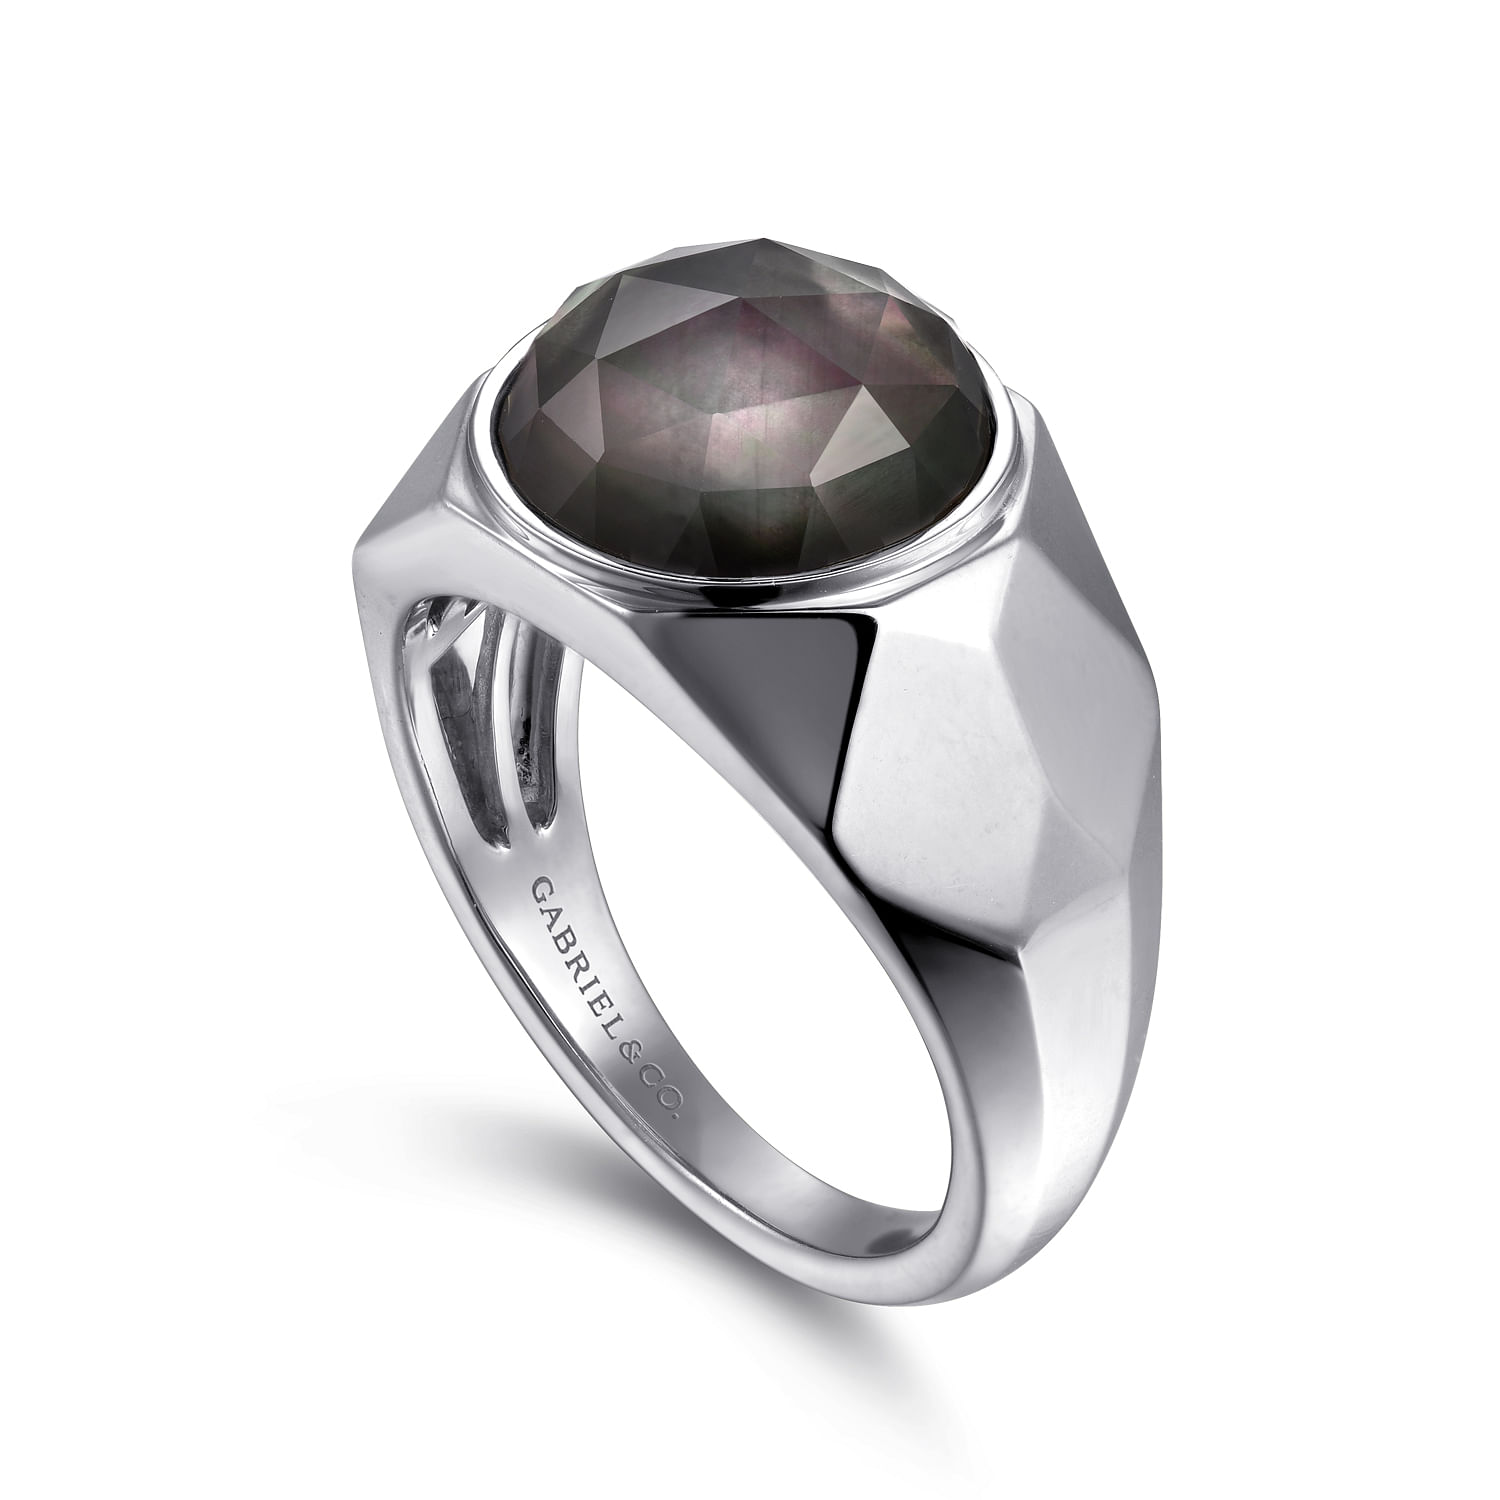 Wide 925 Sterling Silver Signet Ring with Black Mother of Pearl Stone